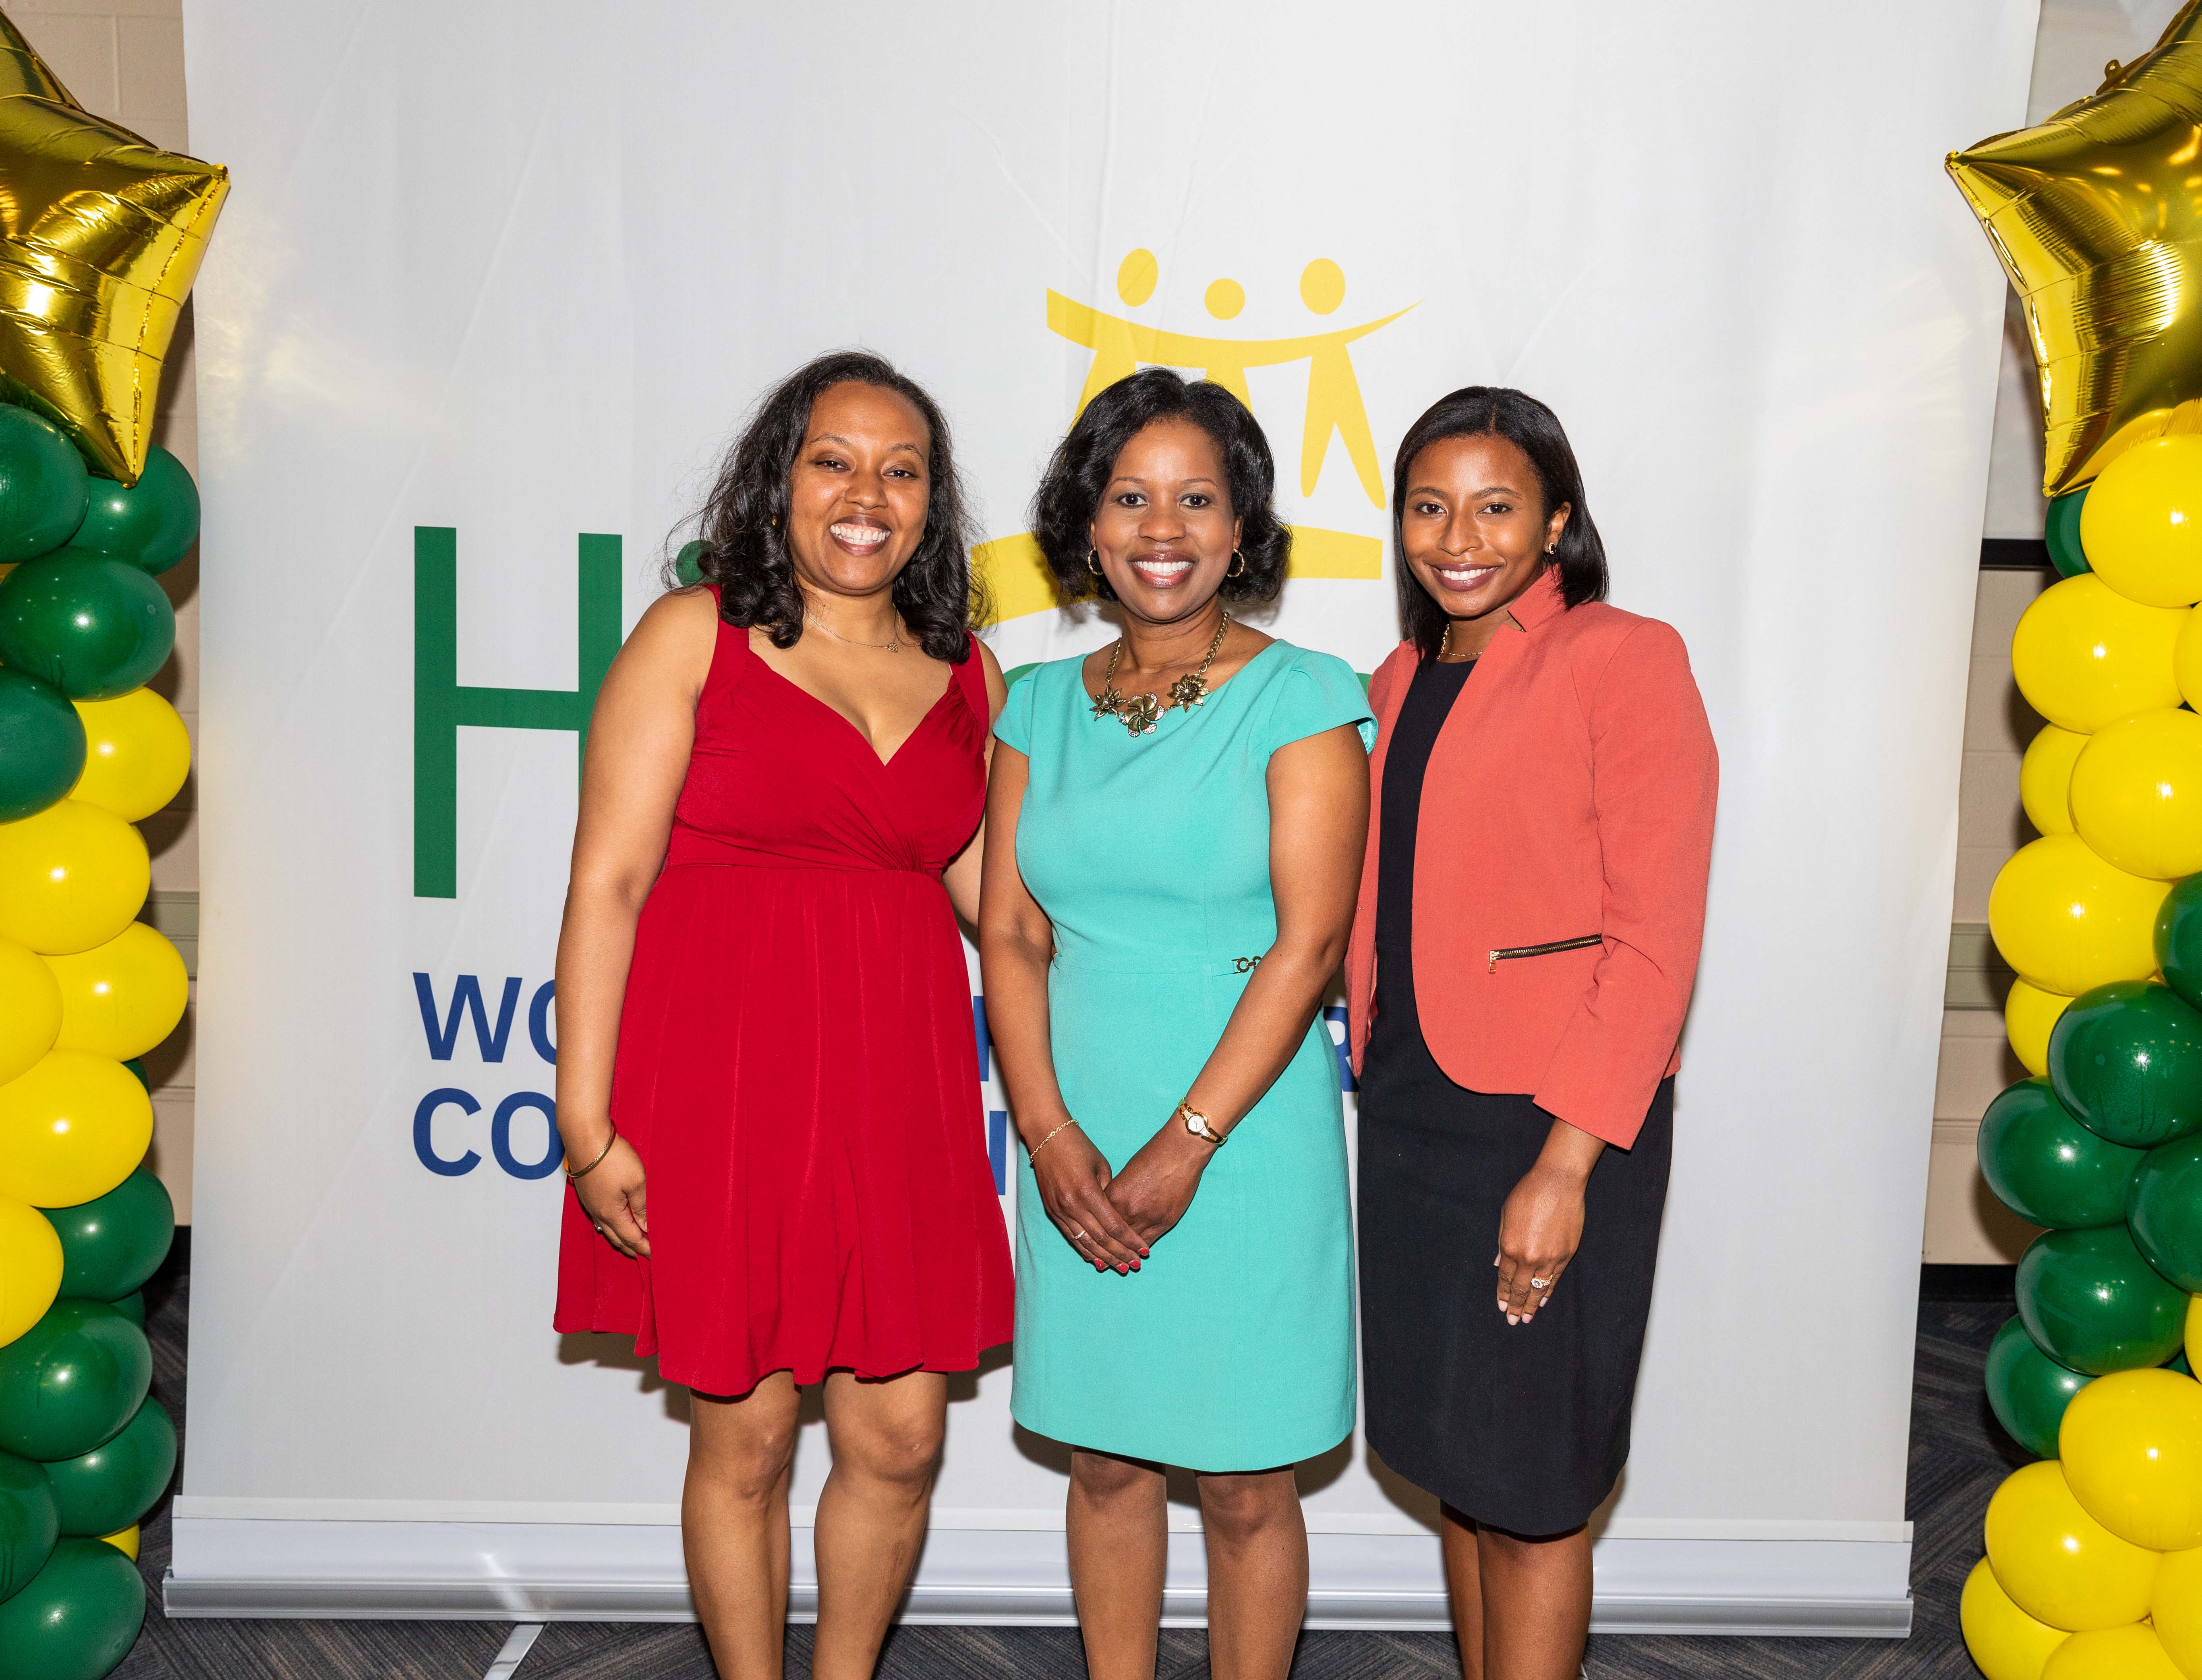 This image is from the Hillside Work-Scholarship Connection Senior Celebration that was held at the College on Wednesday, May 10, 2023.